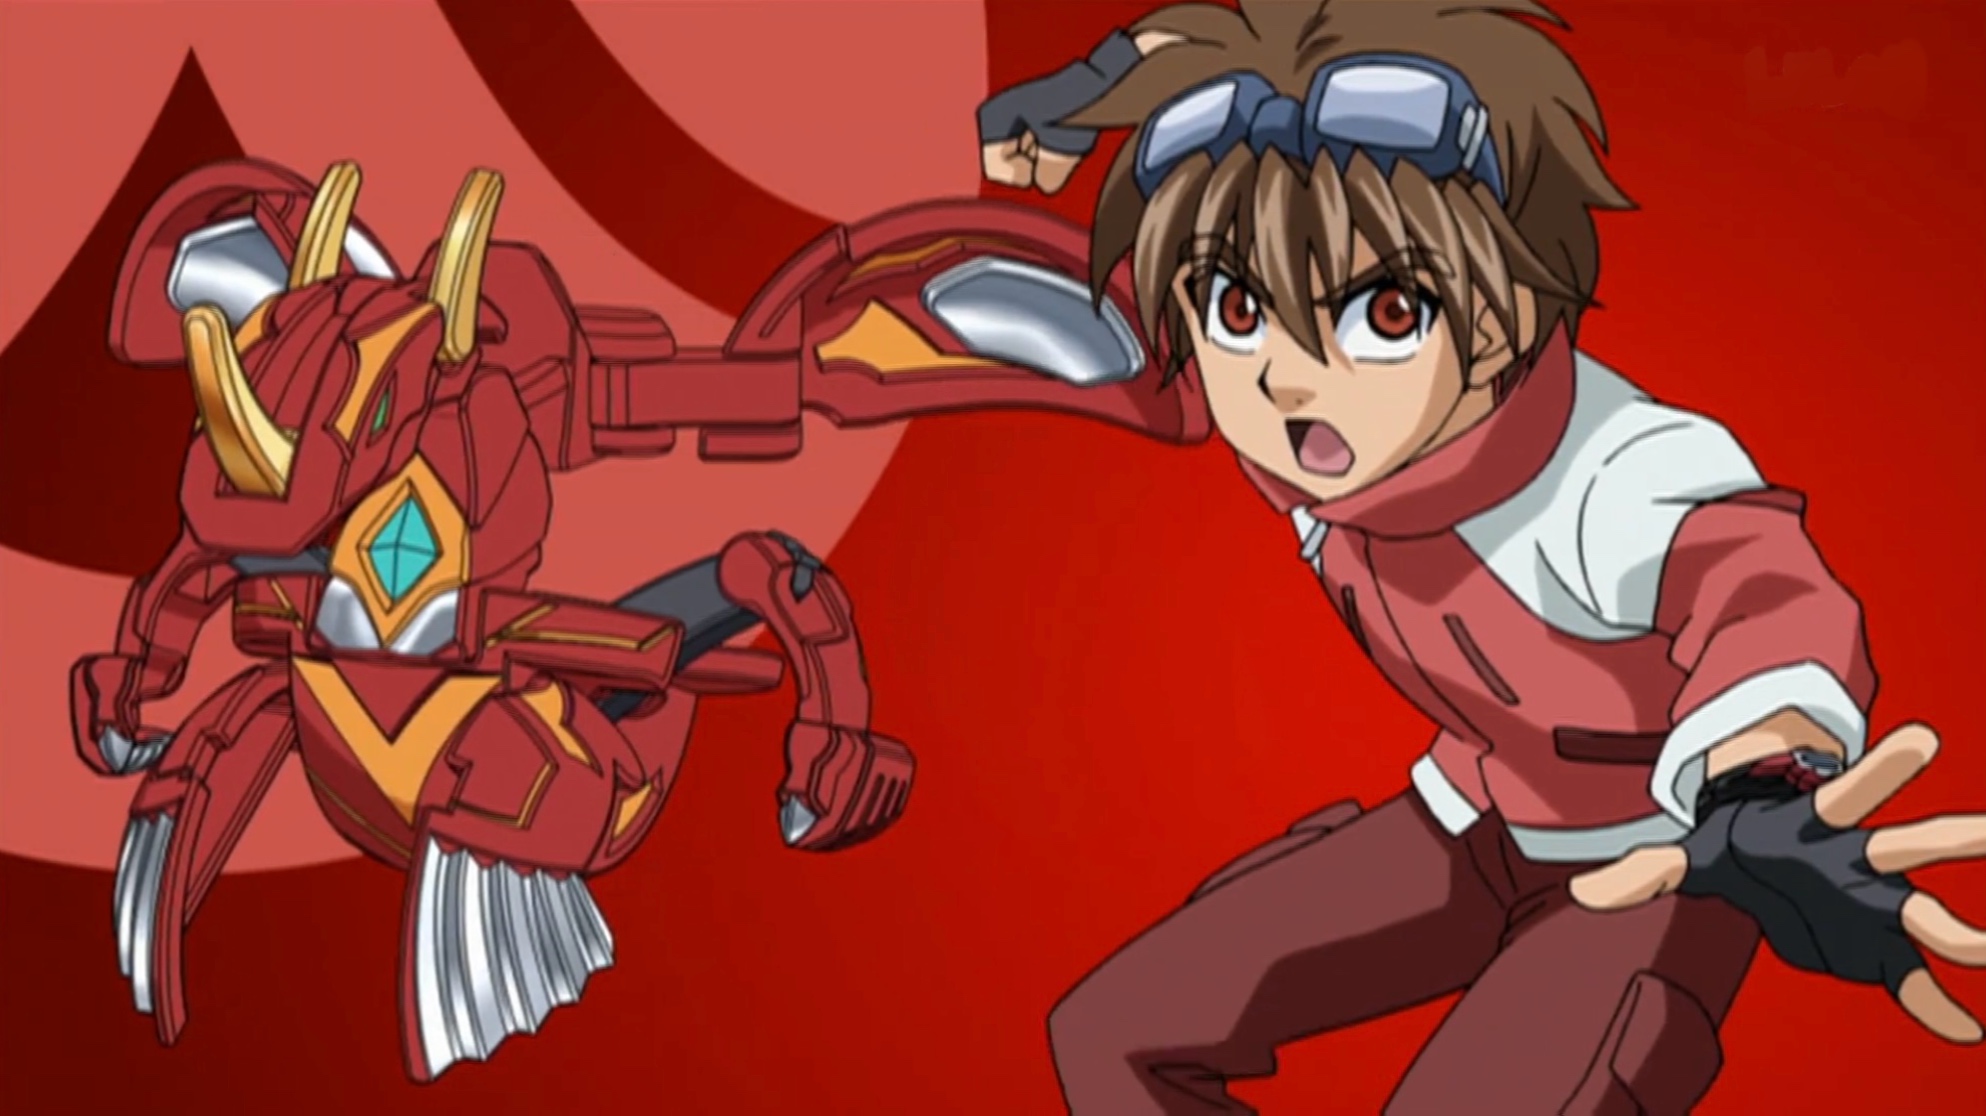 daily orange anime characters on X: the orange anime character of the day  is alice gehabic from bakugan battle brawlers!  / X